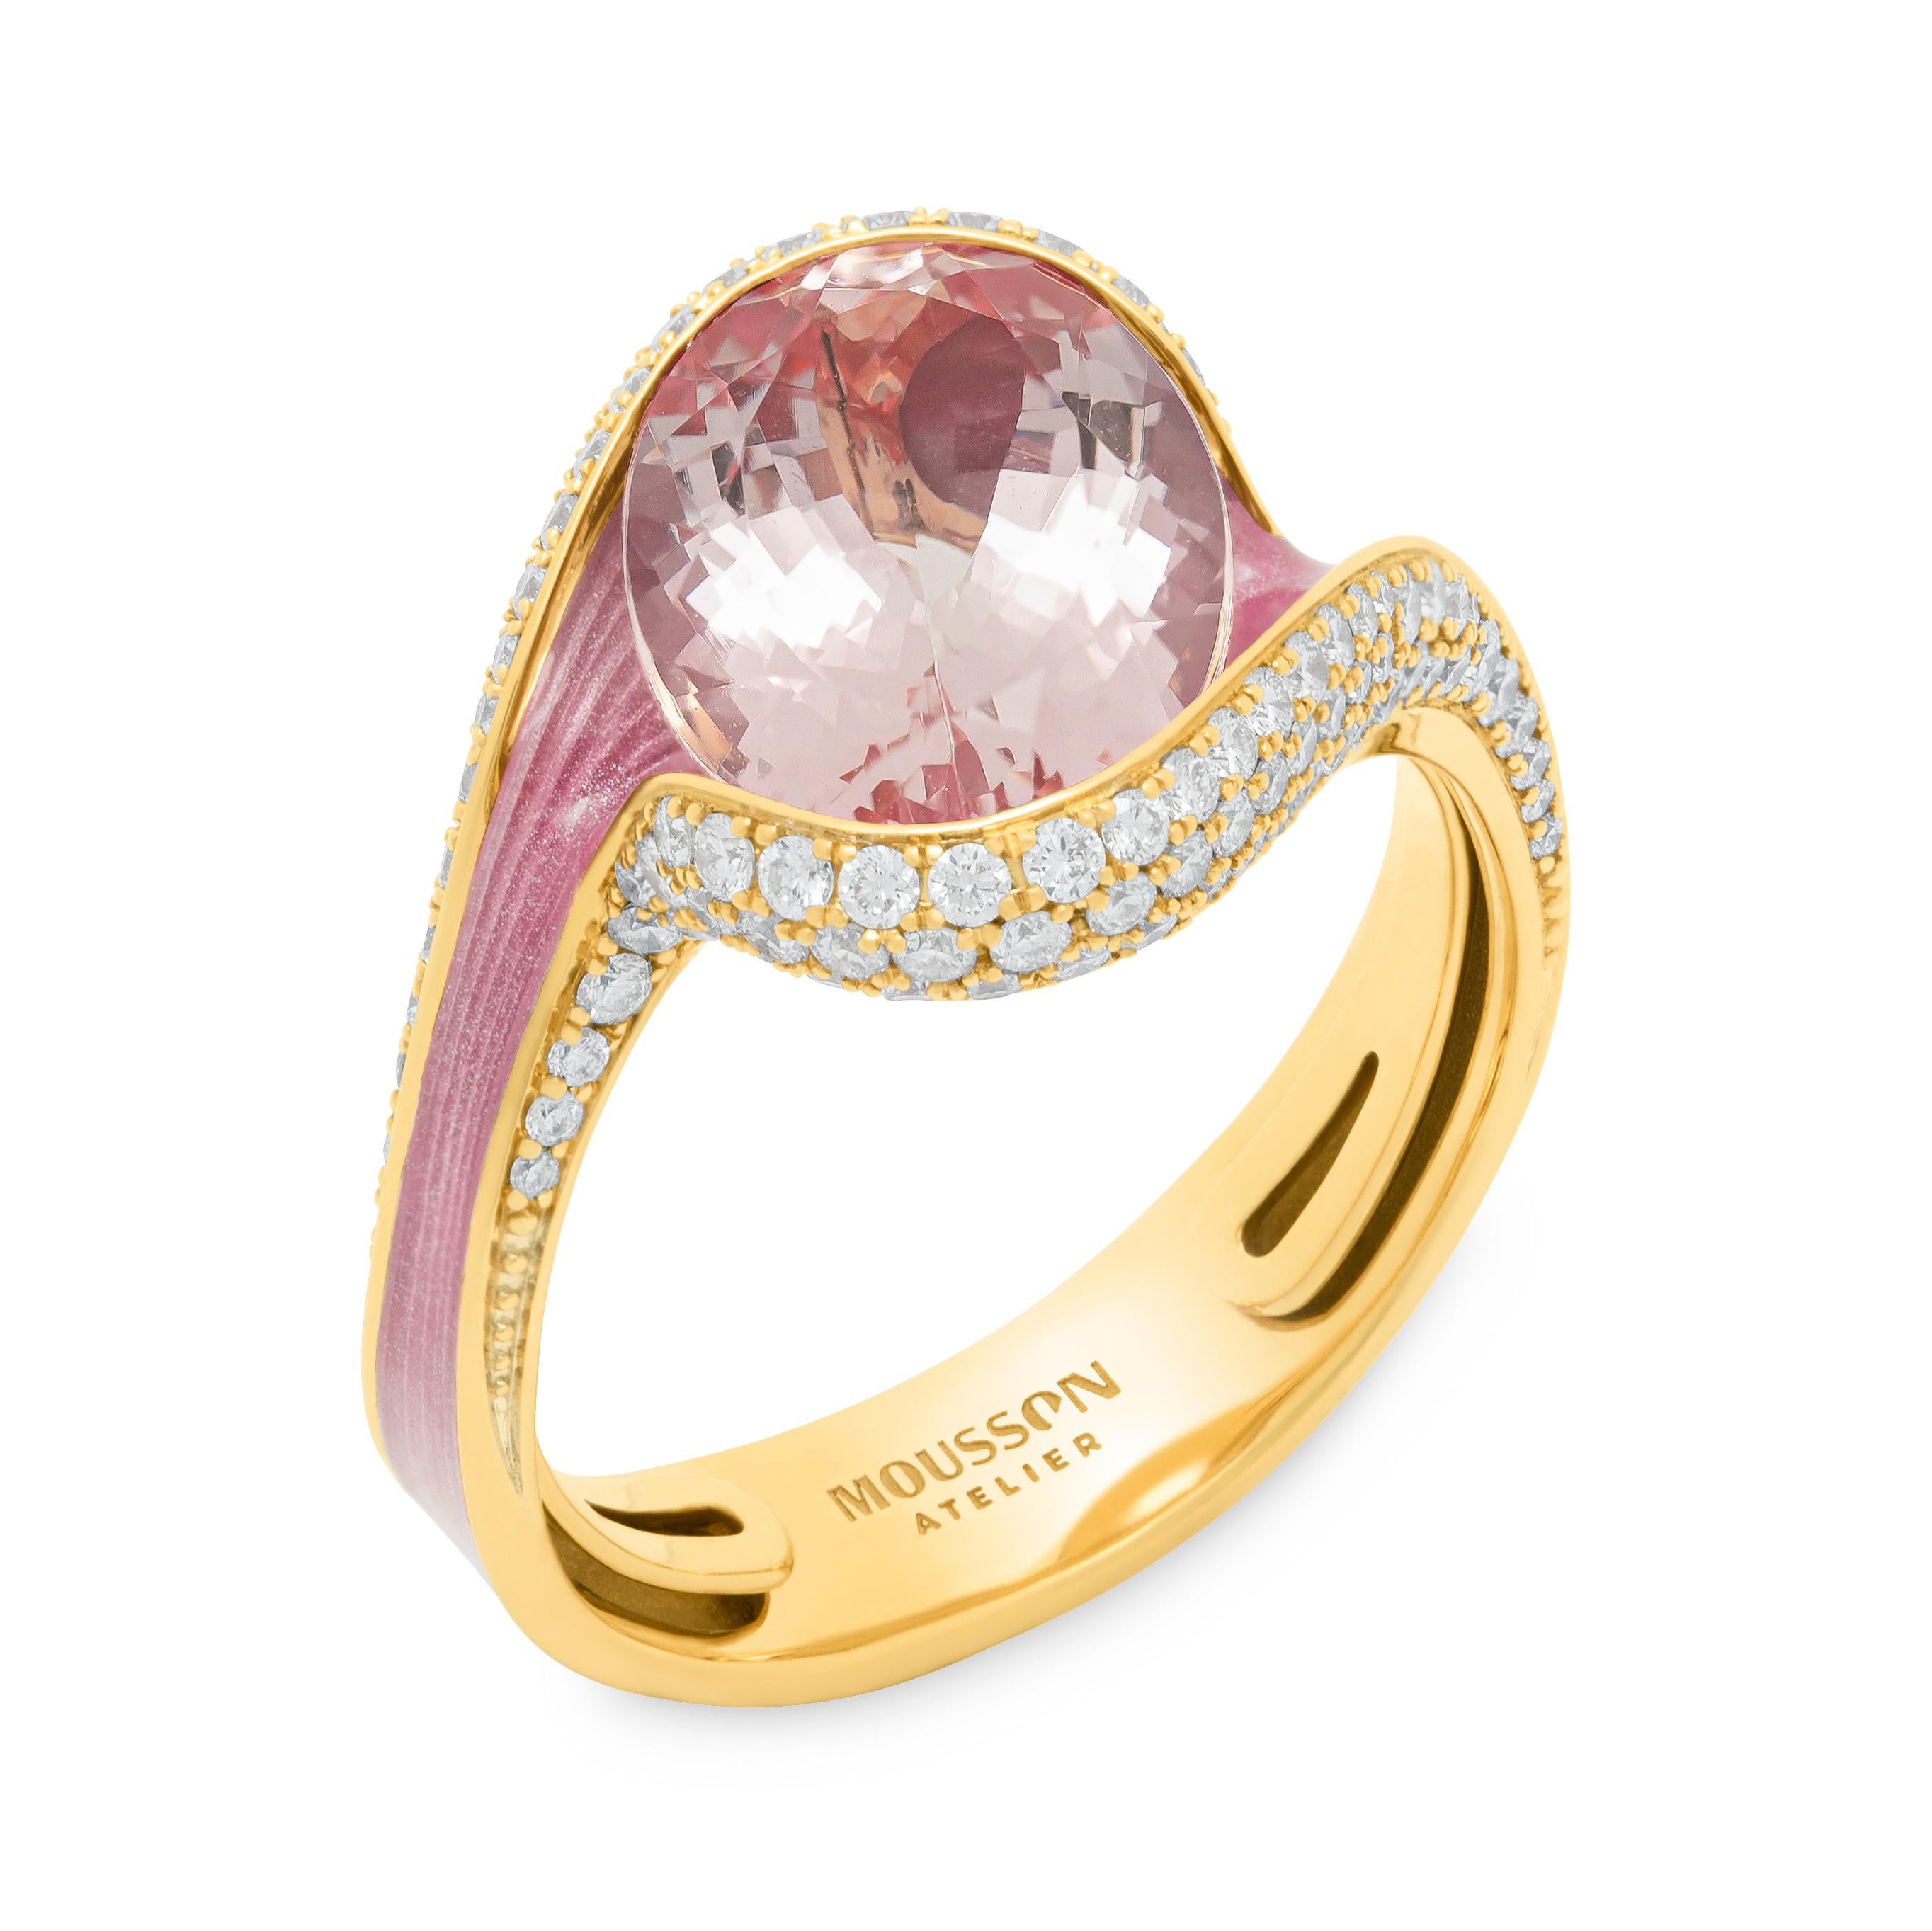 Morganite 3.83 Carat Diamonds Enamel 18 Karat Yellow Gold Melted Colors Ring

Introducing our new Ring from so popular Melted Colors Collection. This collection is filled with all the colors of the rainbow. All stones are perfectly matched in color